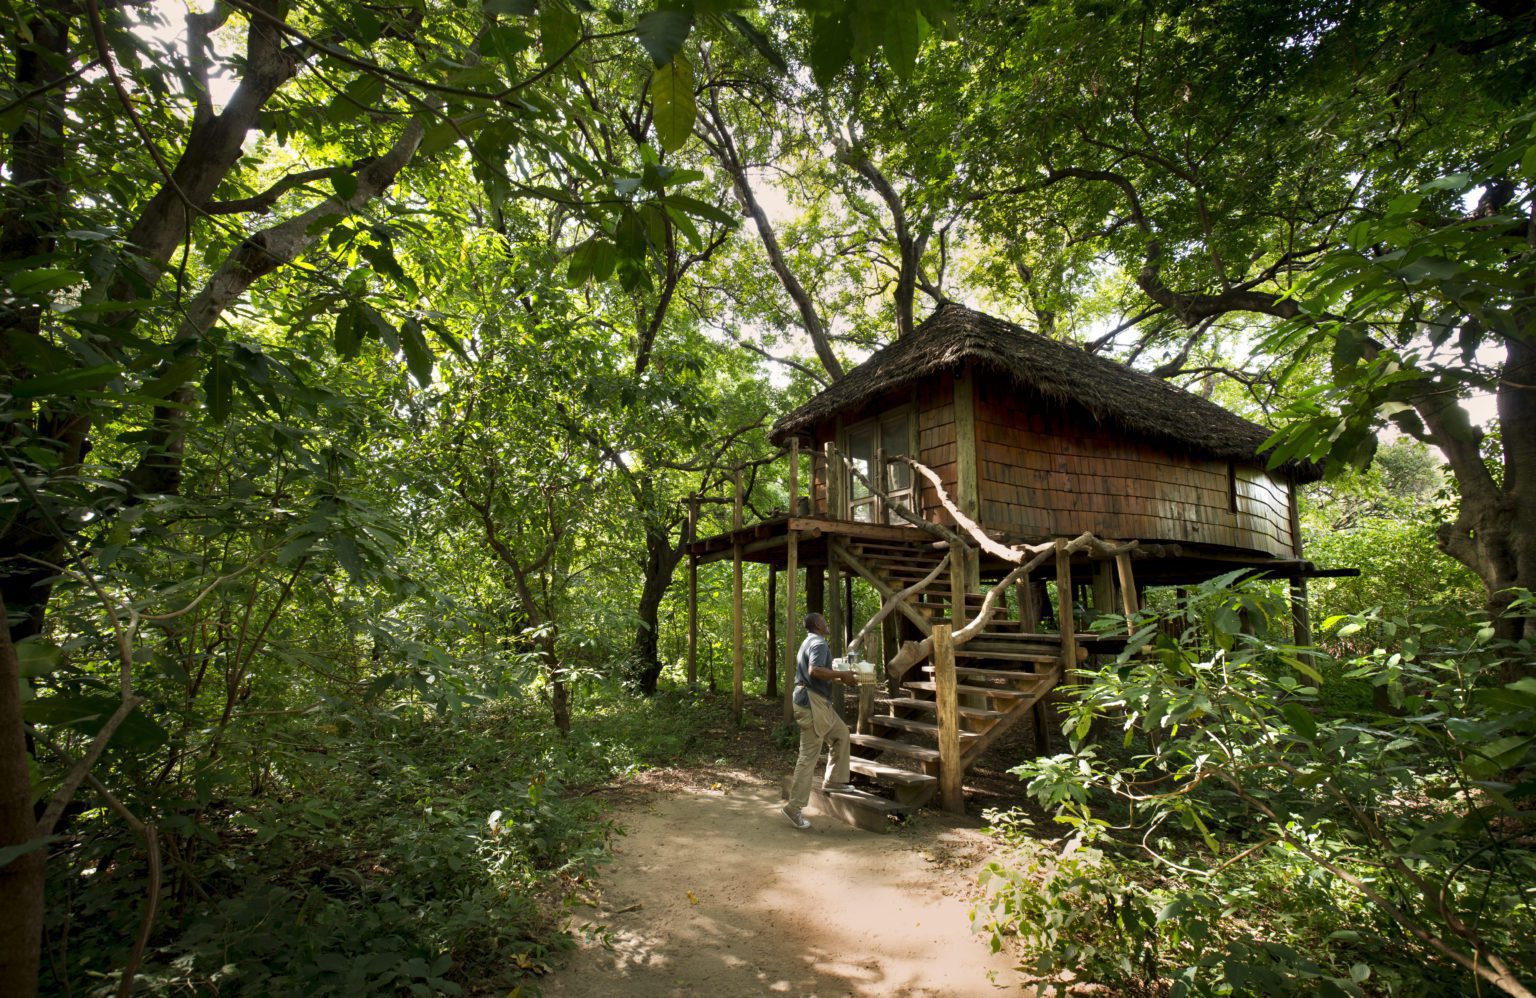 Robinson Crusoe tree house suite built up on a wooden deck on stilts and nestled under a canopy of trees, staff member carrying a tray up the stairs